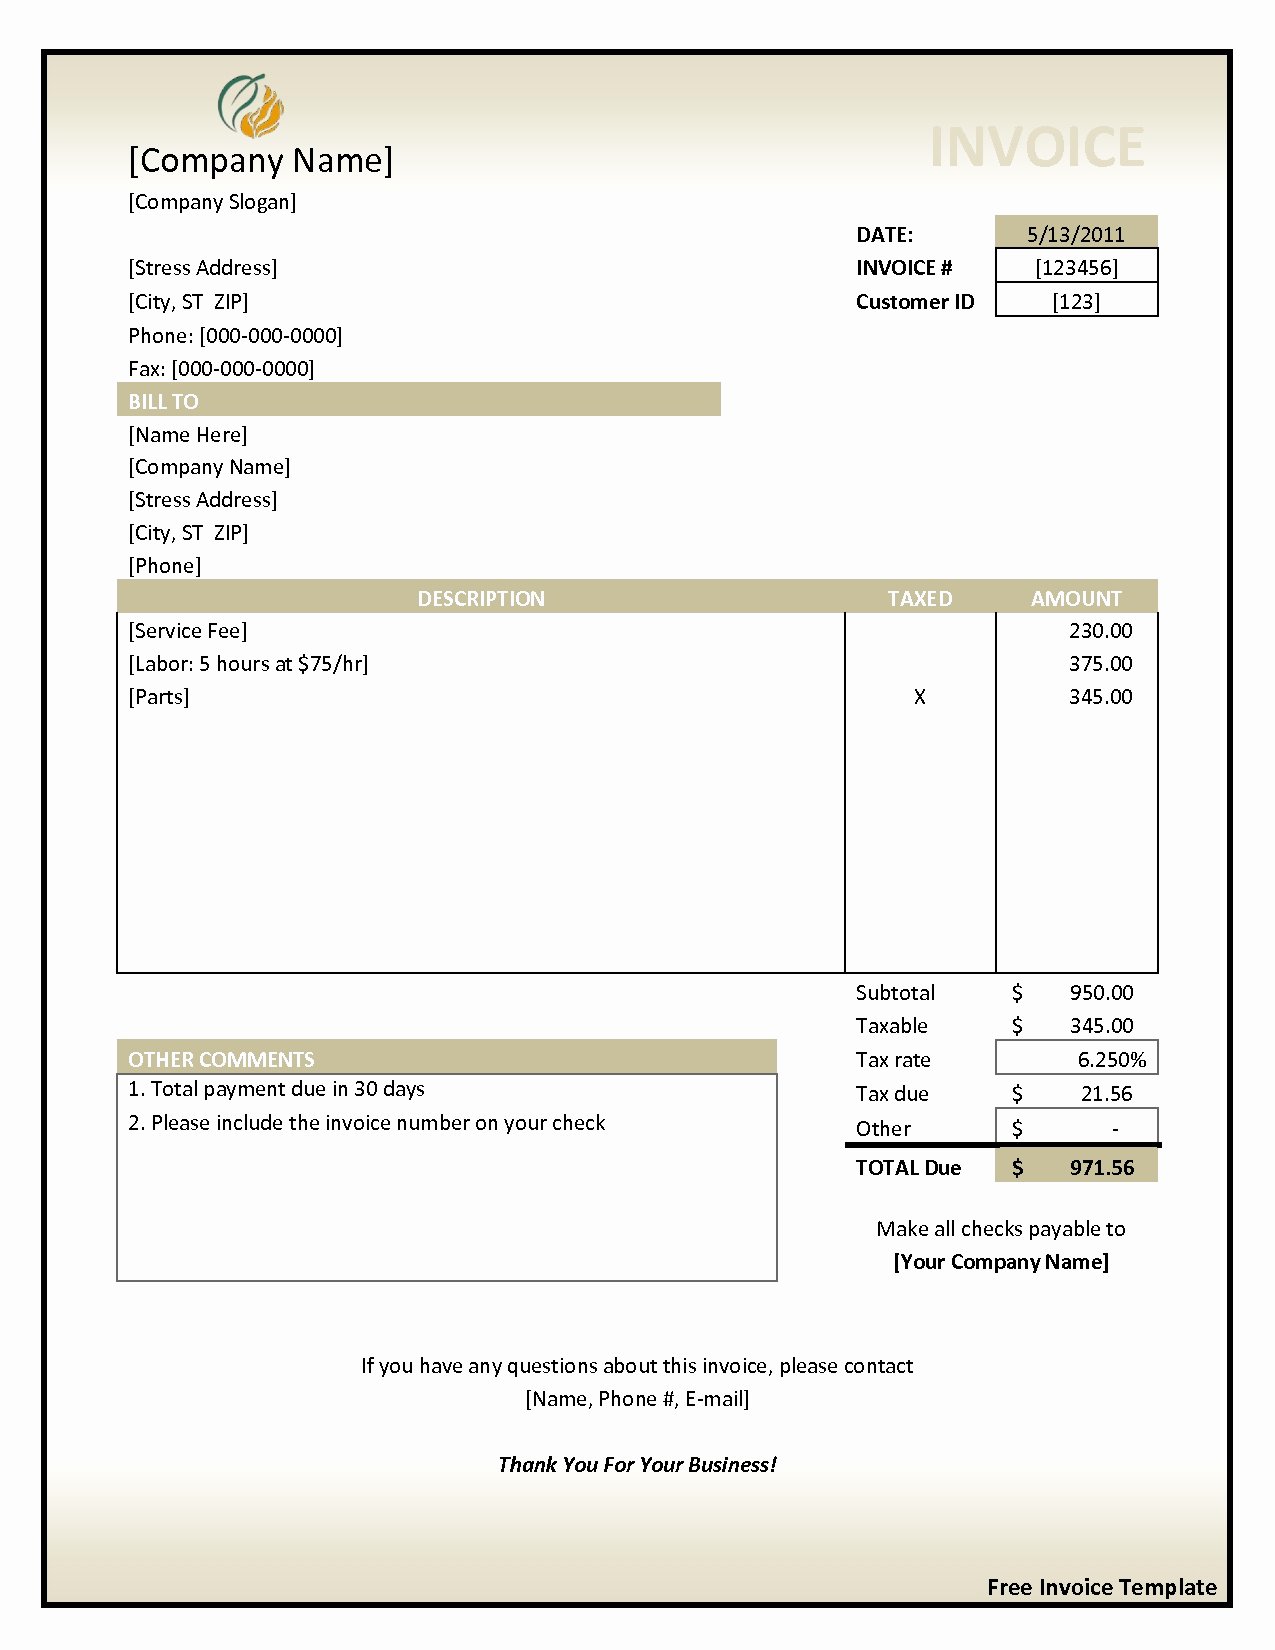 Free Contractor Invoice Template Inspirational Invoices Samples Free Invoice Template Ideas